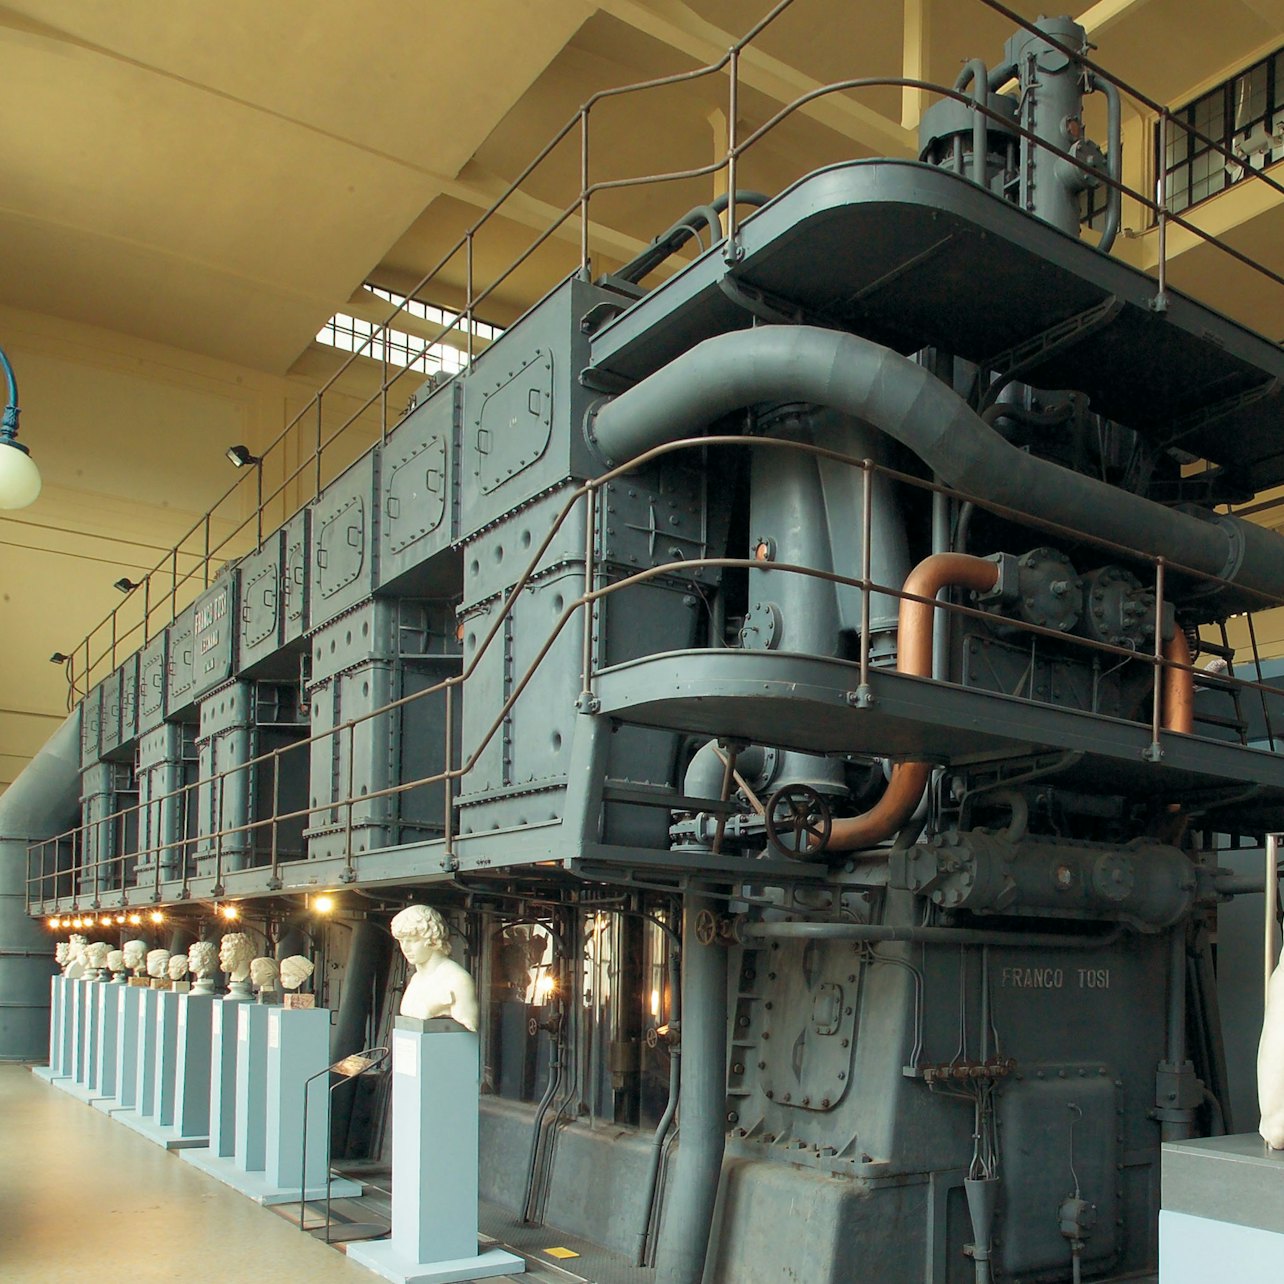 Capitoline Museums and Centrale Montemartini with Multimedia Video - Accommodations in Rome